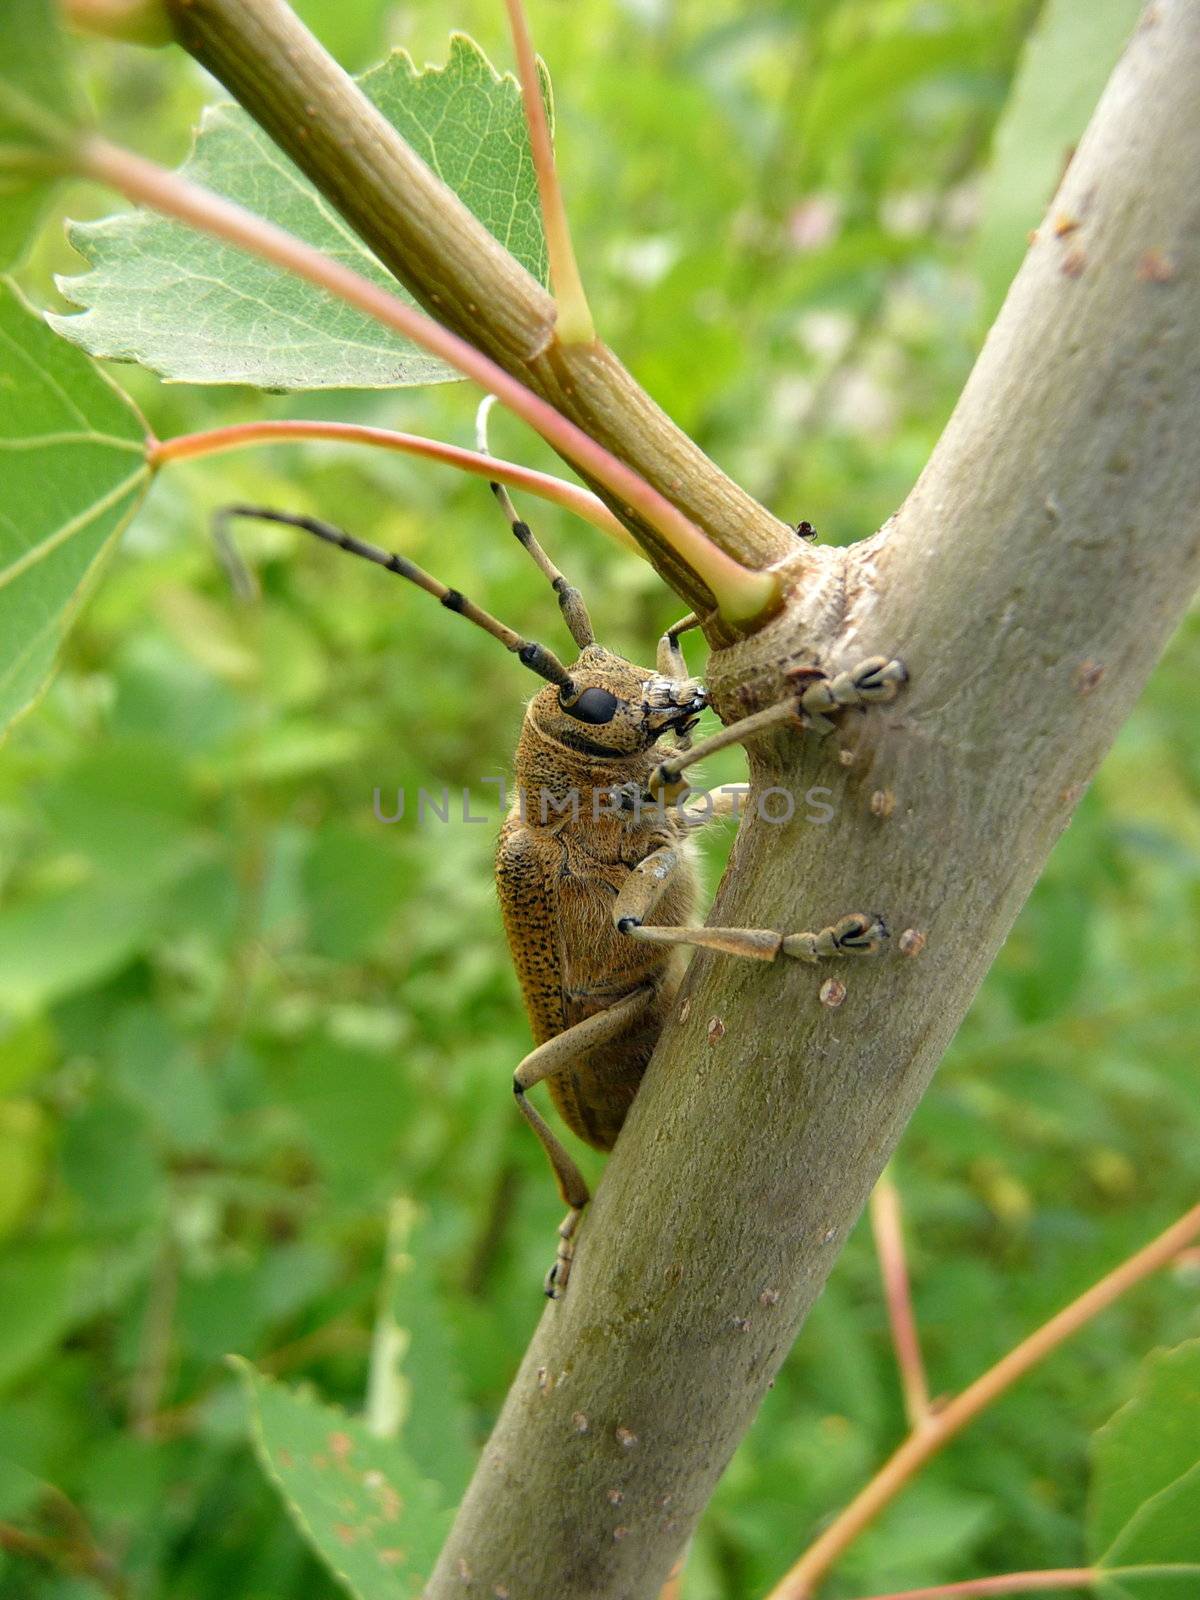 Large bug with long antennas on the branch